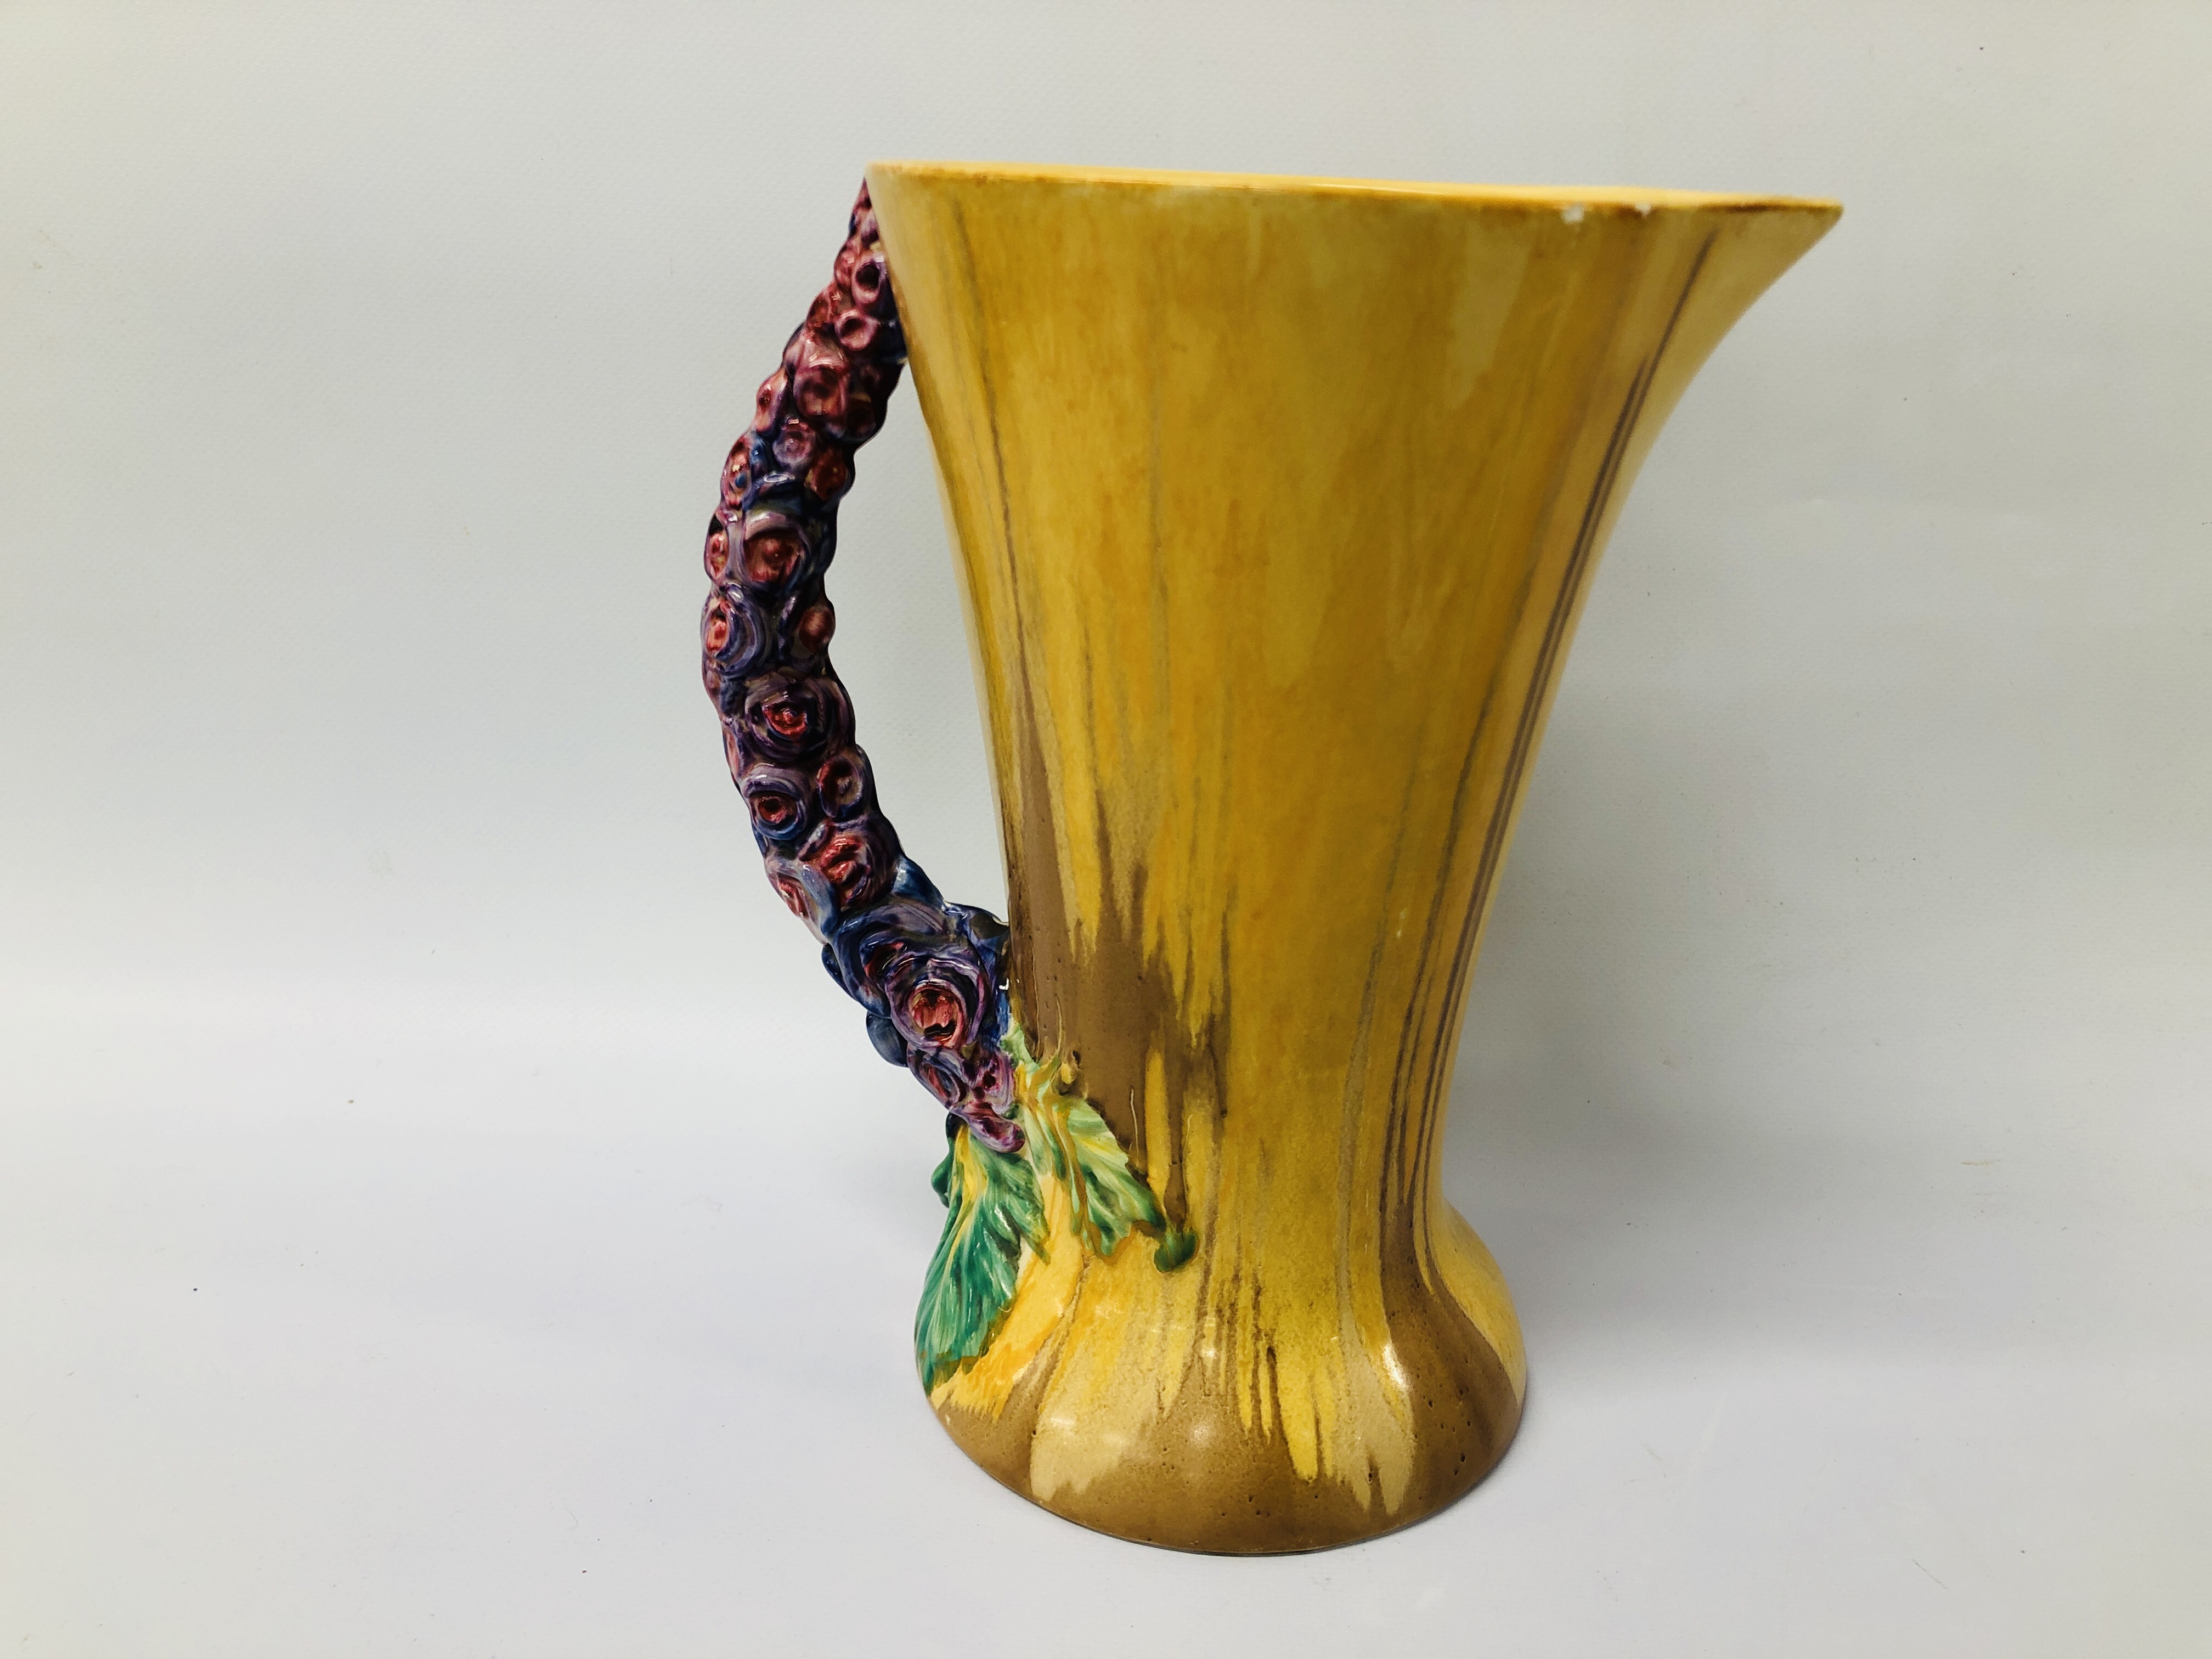 A CLARICE CLIFF BOWL ALONG WITH A CLARICE CLIFF JUG A/F. - Image 10 of 12